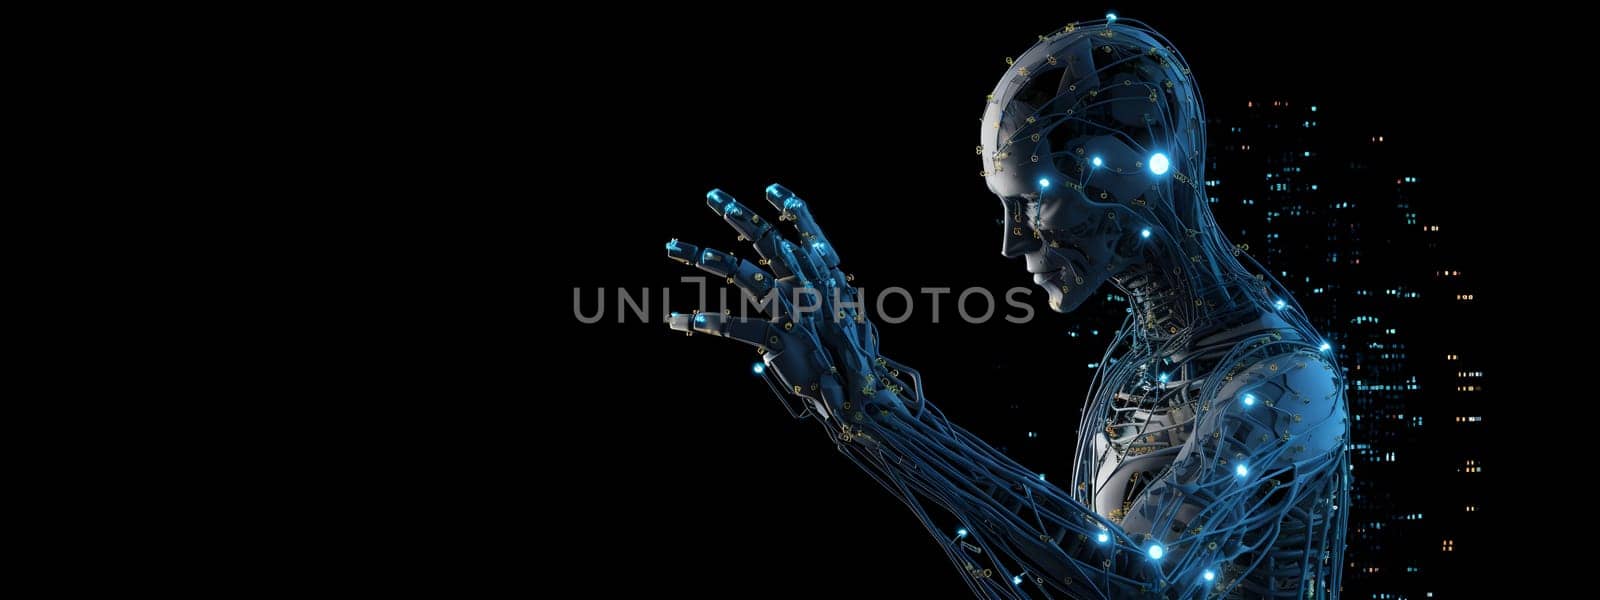 anthropomorphic humanoid robot reaches out by hand on black background, neural network generated art. Digitally generated image. Not based on any actual person, scene or pattern.